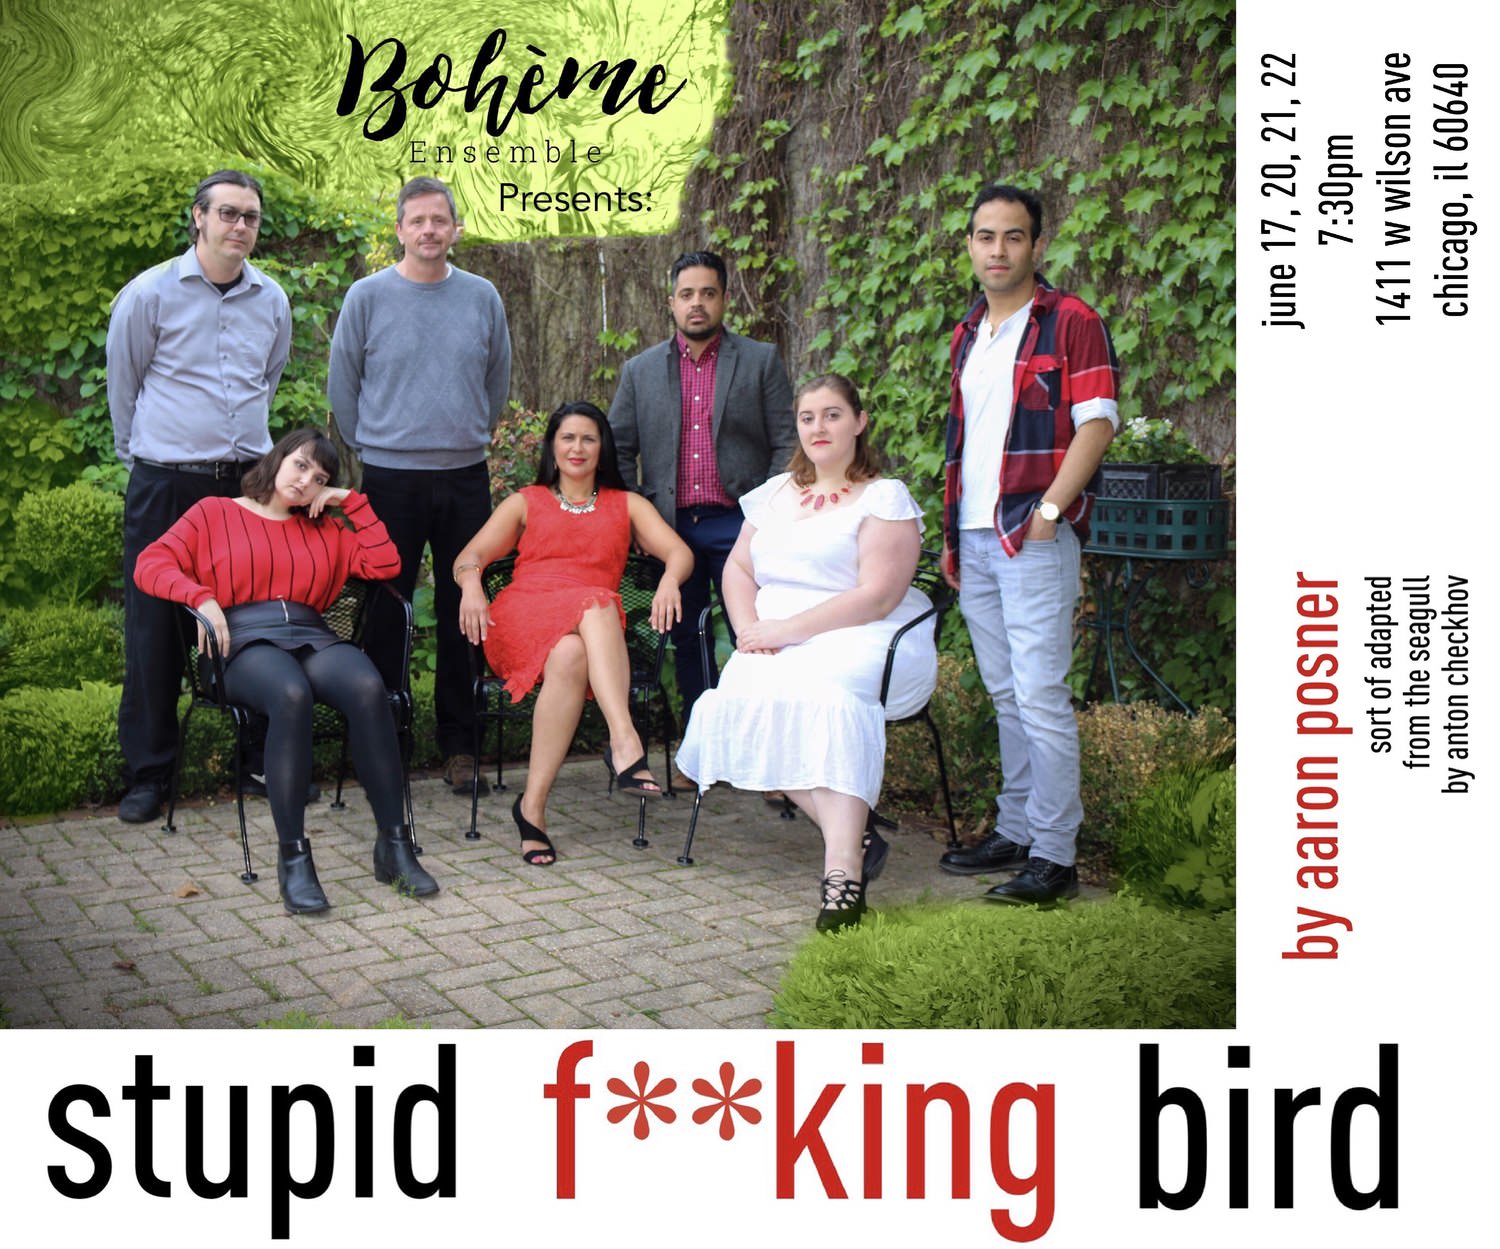 Boh me Ensemble presents Stupid F**king Bird by Aaron Posner, sort of adapted from The Seagull by Anton Chekov. June 17- June 22 at The Wilson Space (1411 W Wilson, Chicago, IL). 